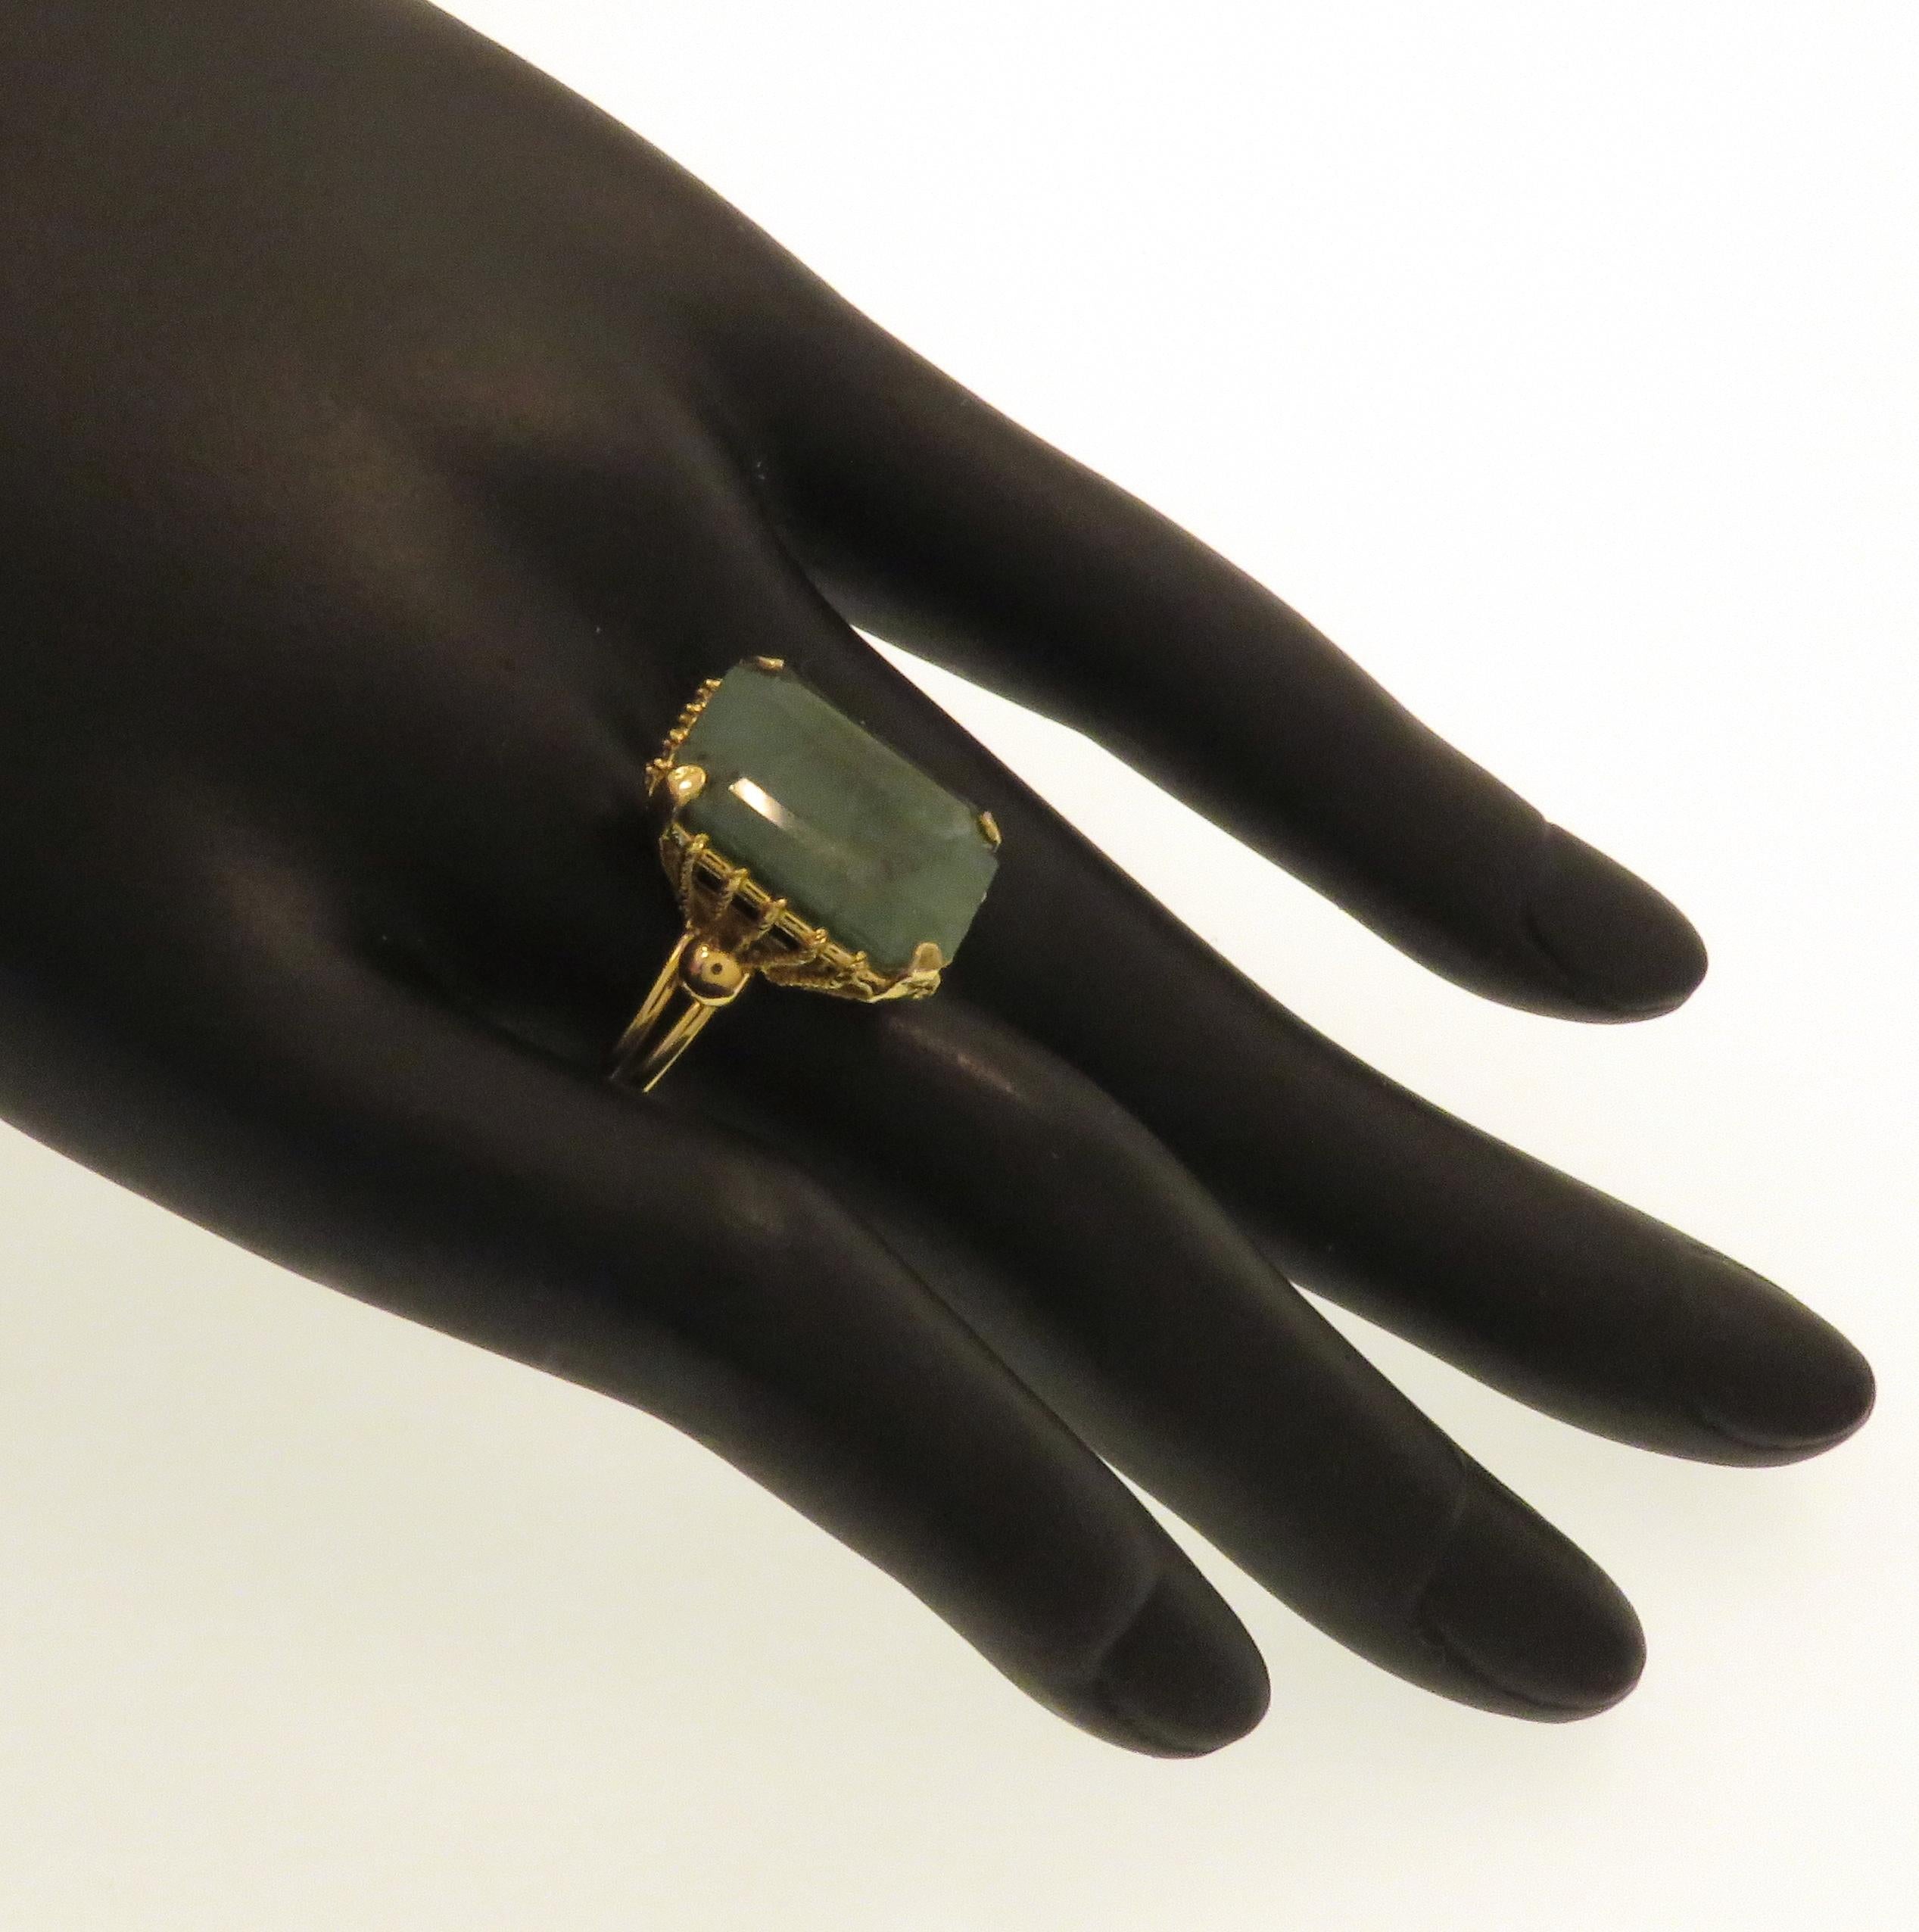 Beautiful vintage cocktail ring handcrafted in 18 karat yellow gold with a large green emerald. The dimension of the emerald is: 16x12 mm - 0,629x0,472 inches. Finger size is: US 7, French 55, Italian 15, resizable to the customer's size before